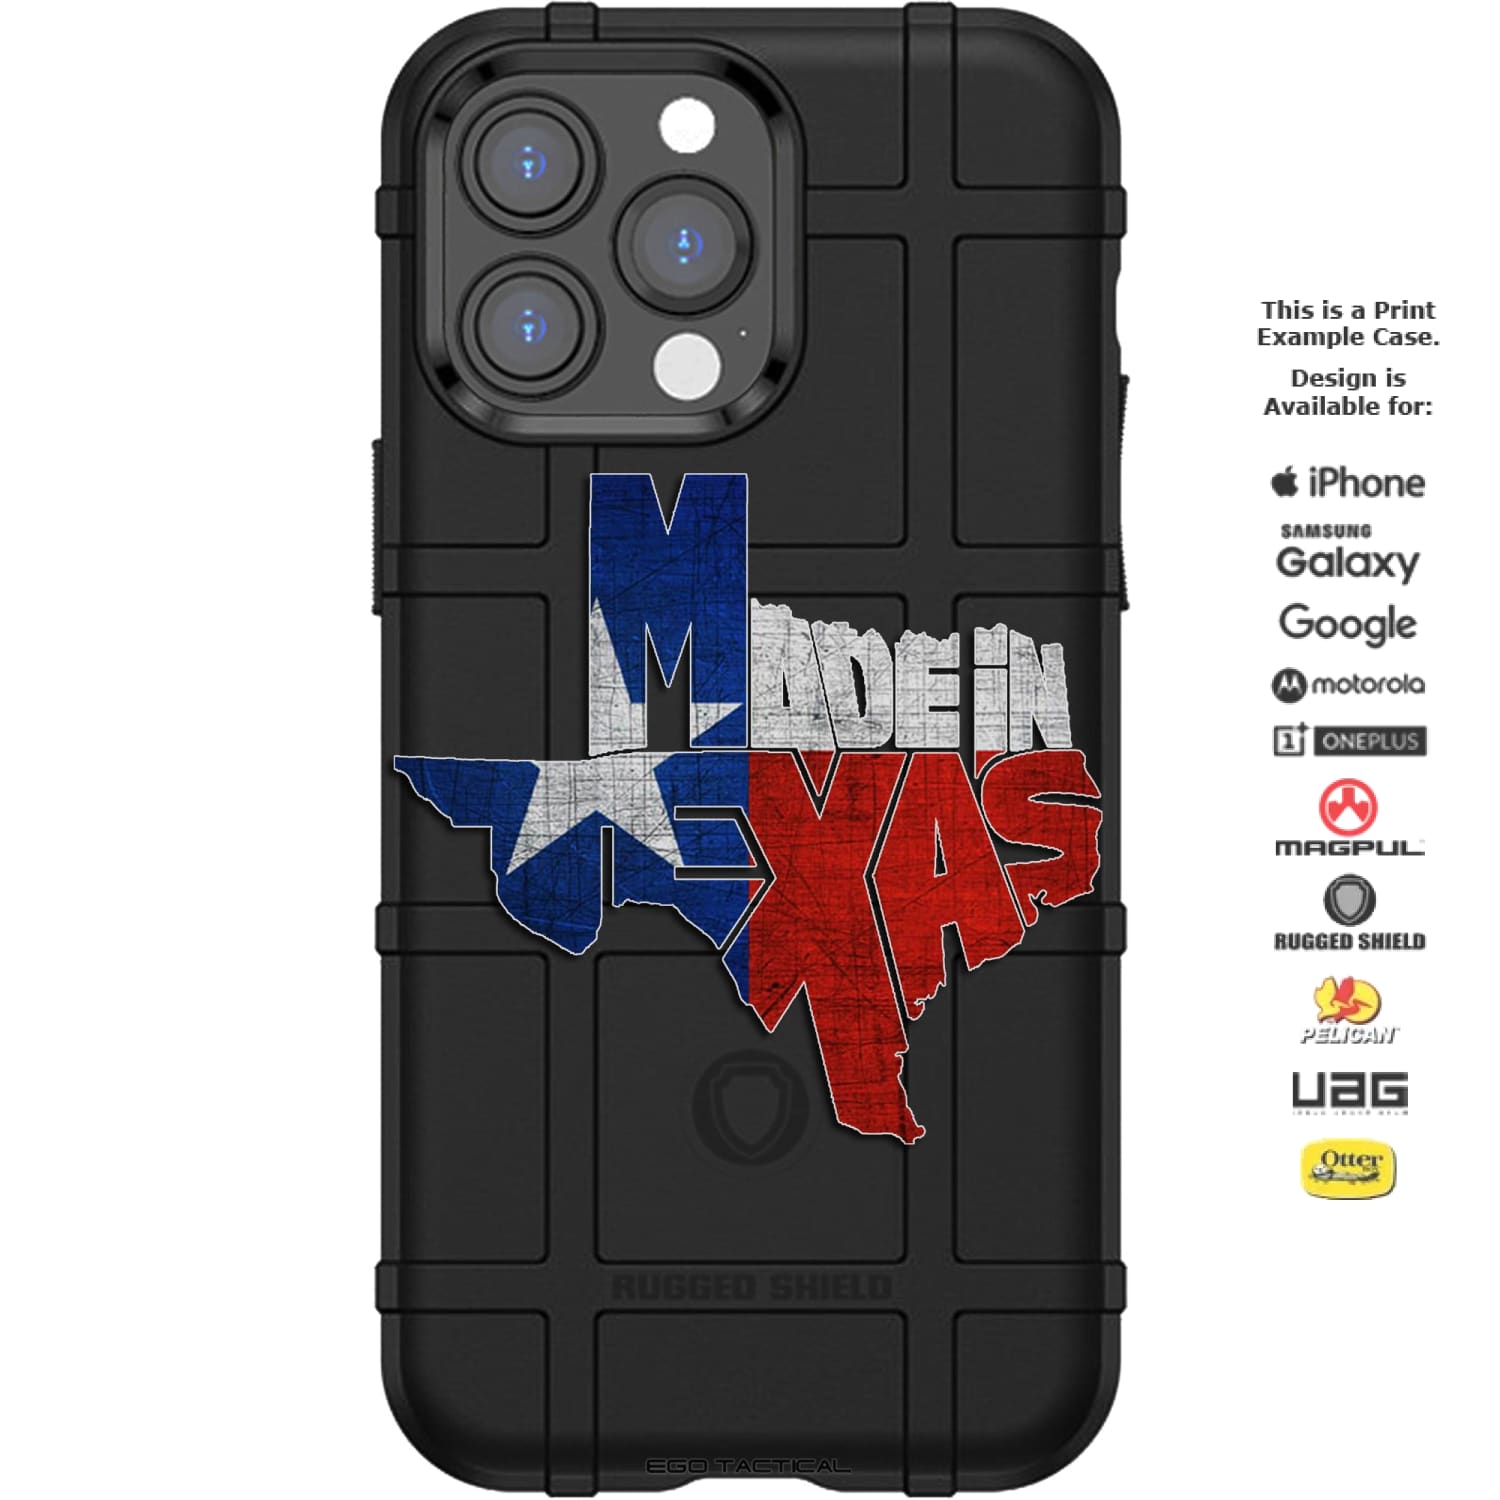 Made in Texas Custom Printed Android & Apple Phone Case Design